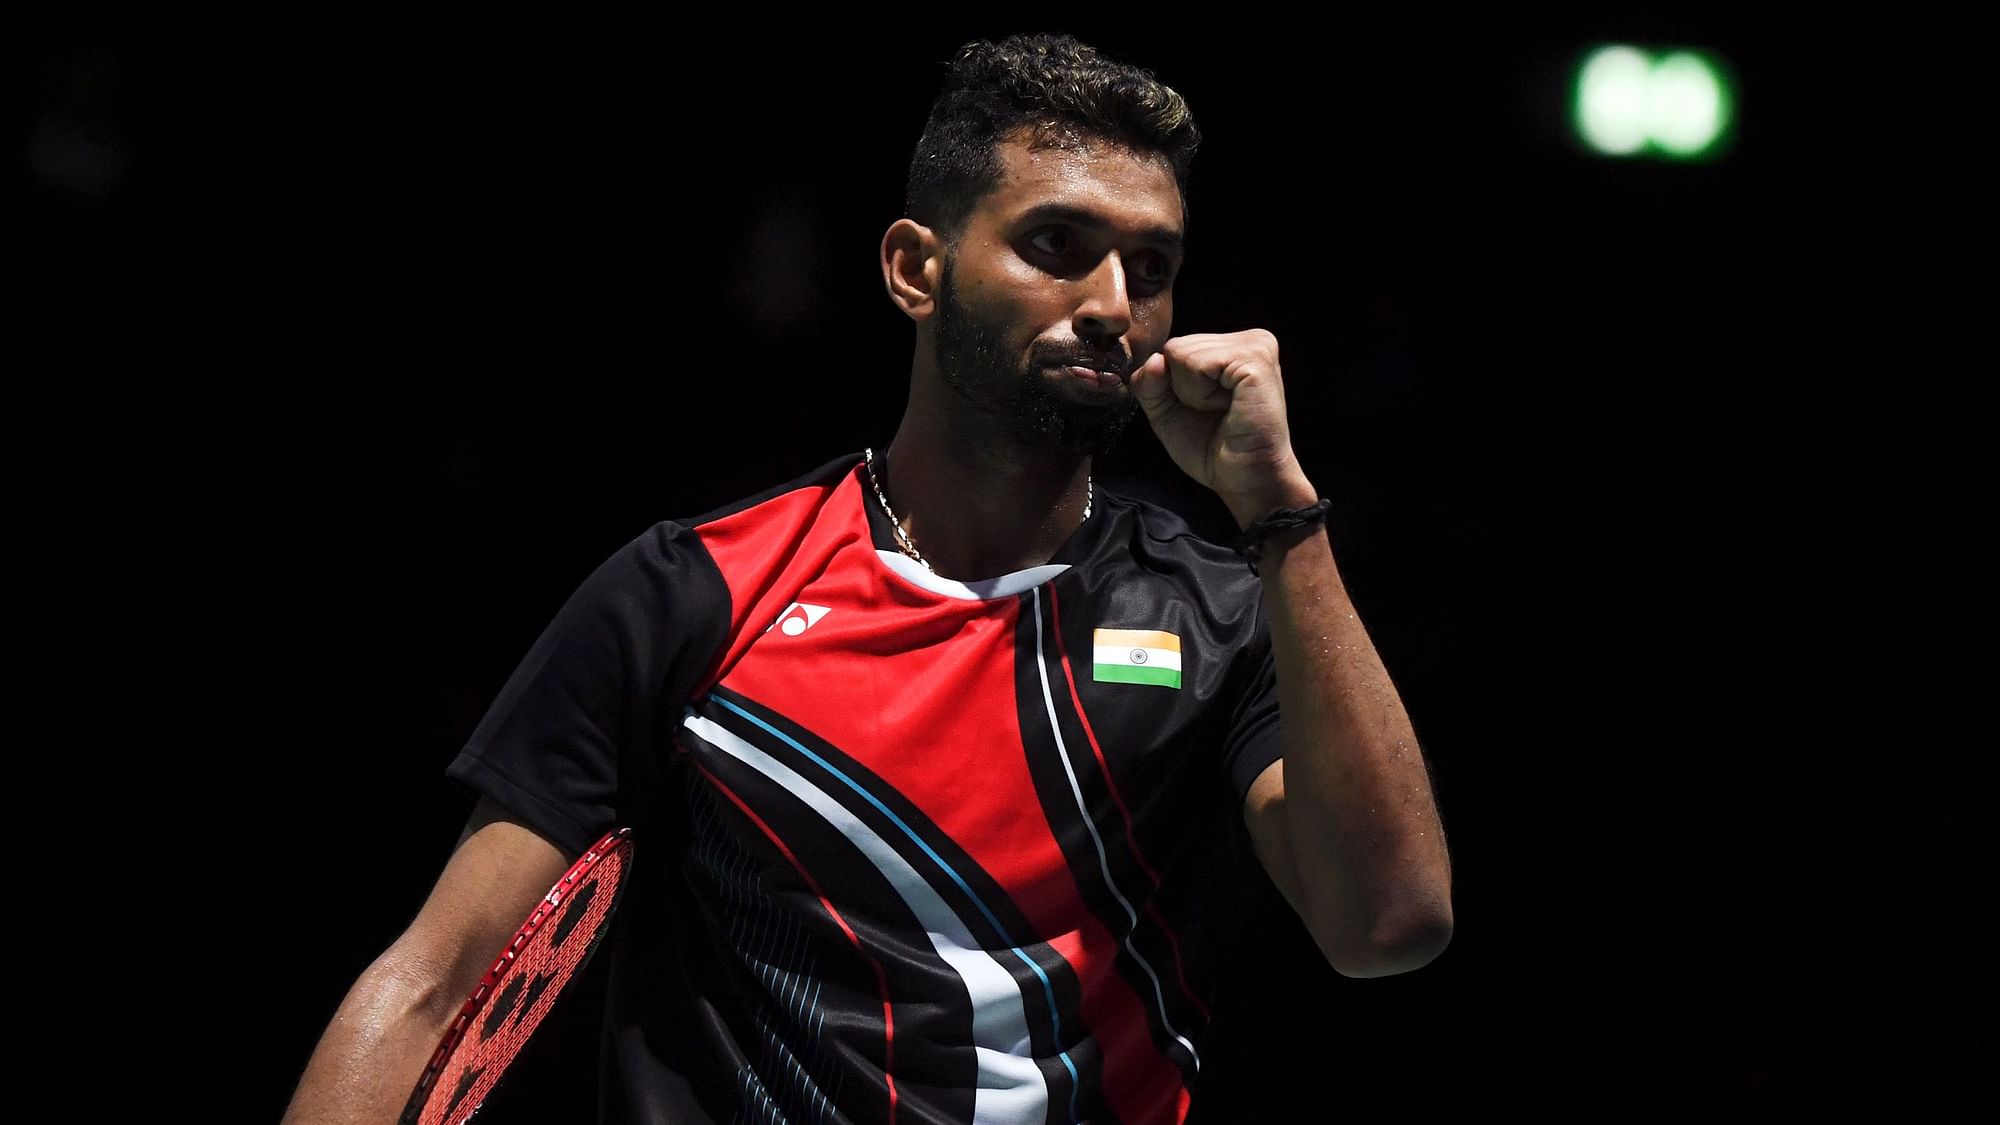 HS Prannoy hit out at the badminton federation for not nominating his name for the Arjuna Award, two years in a row.